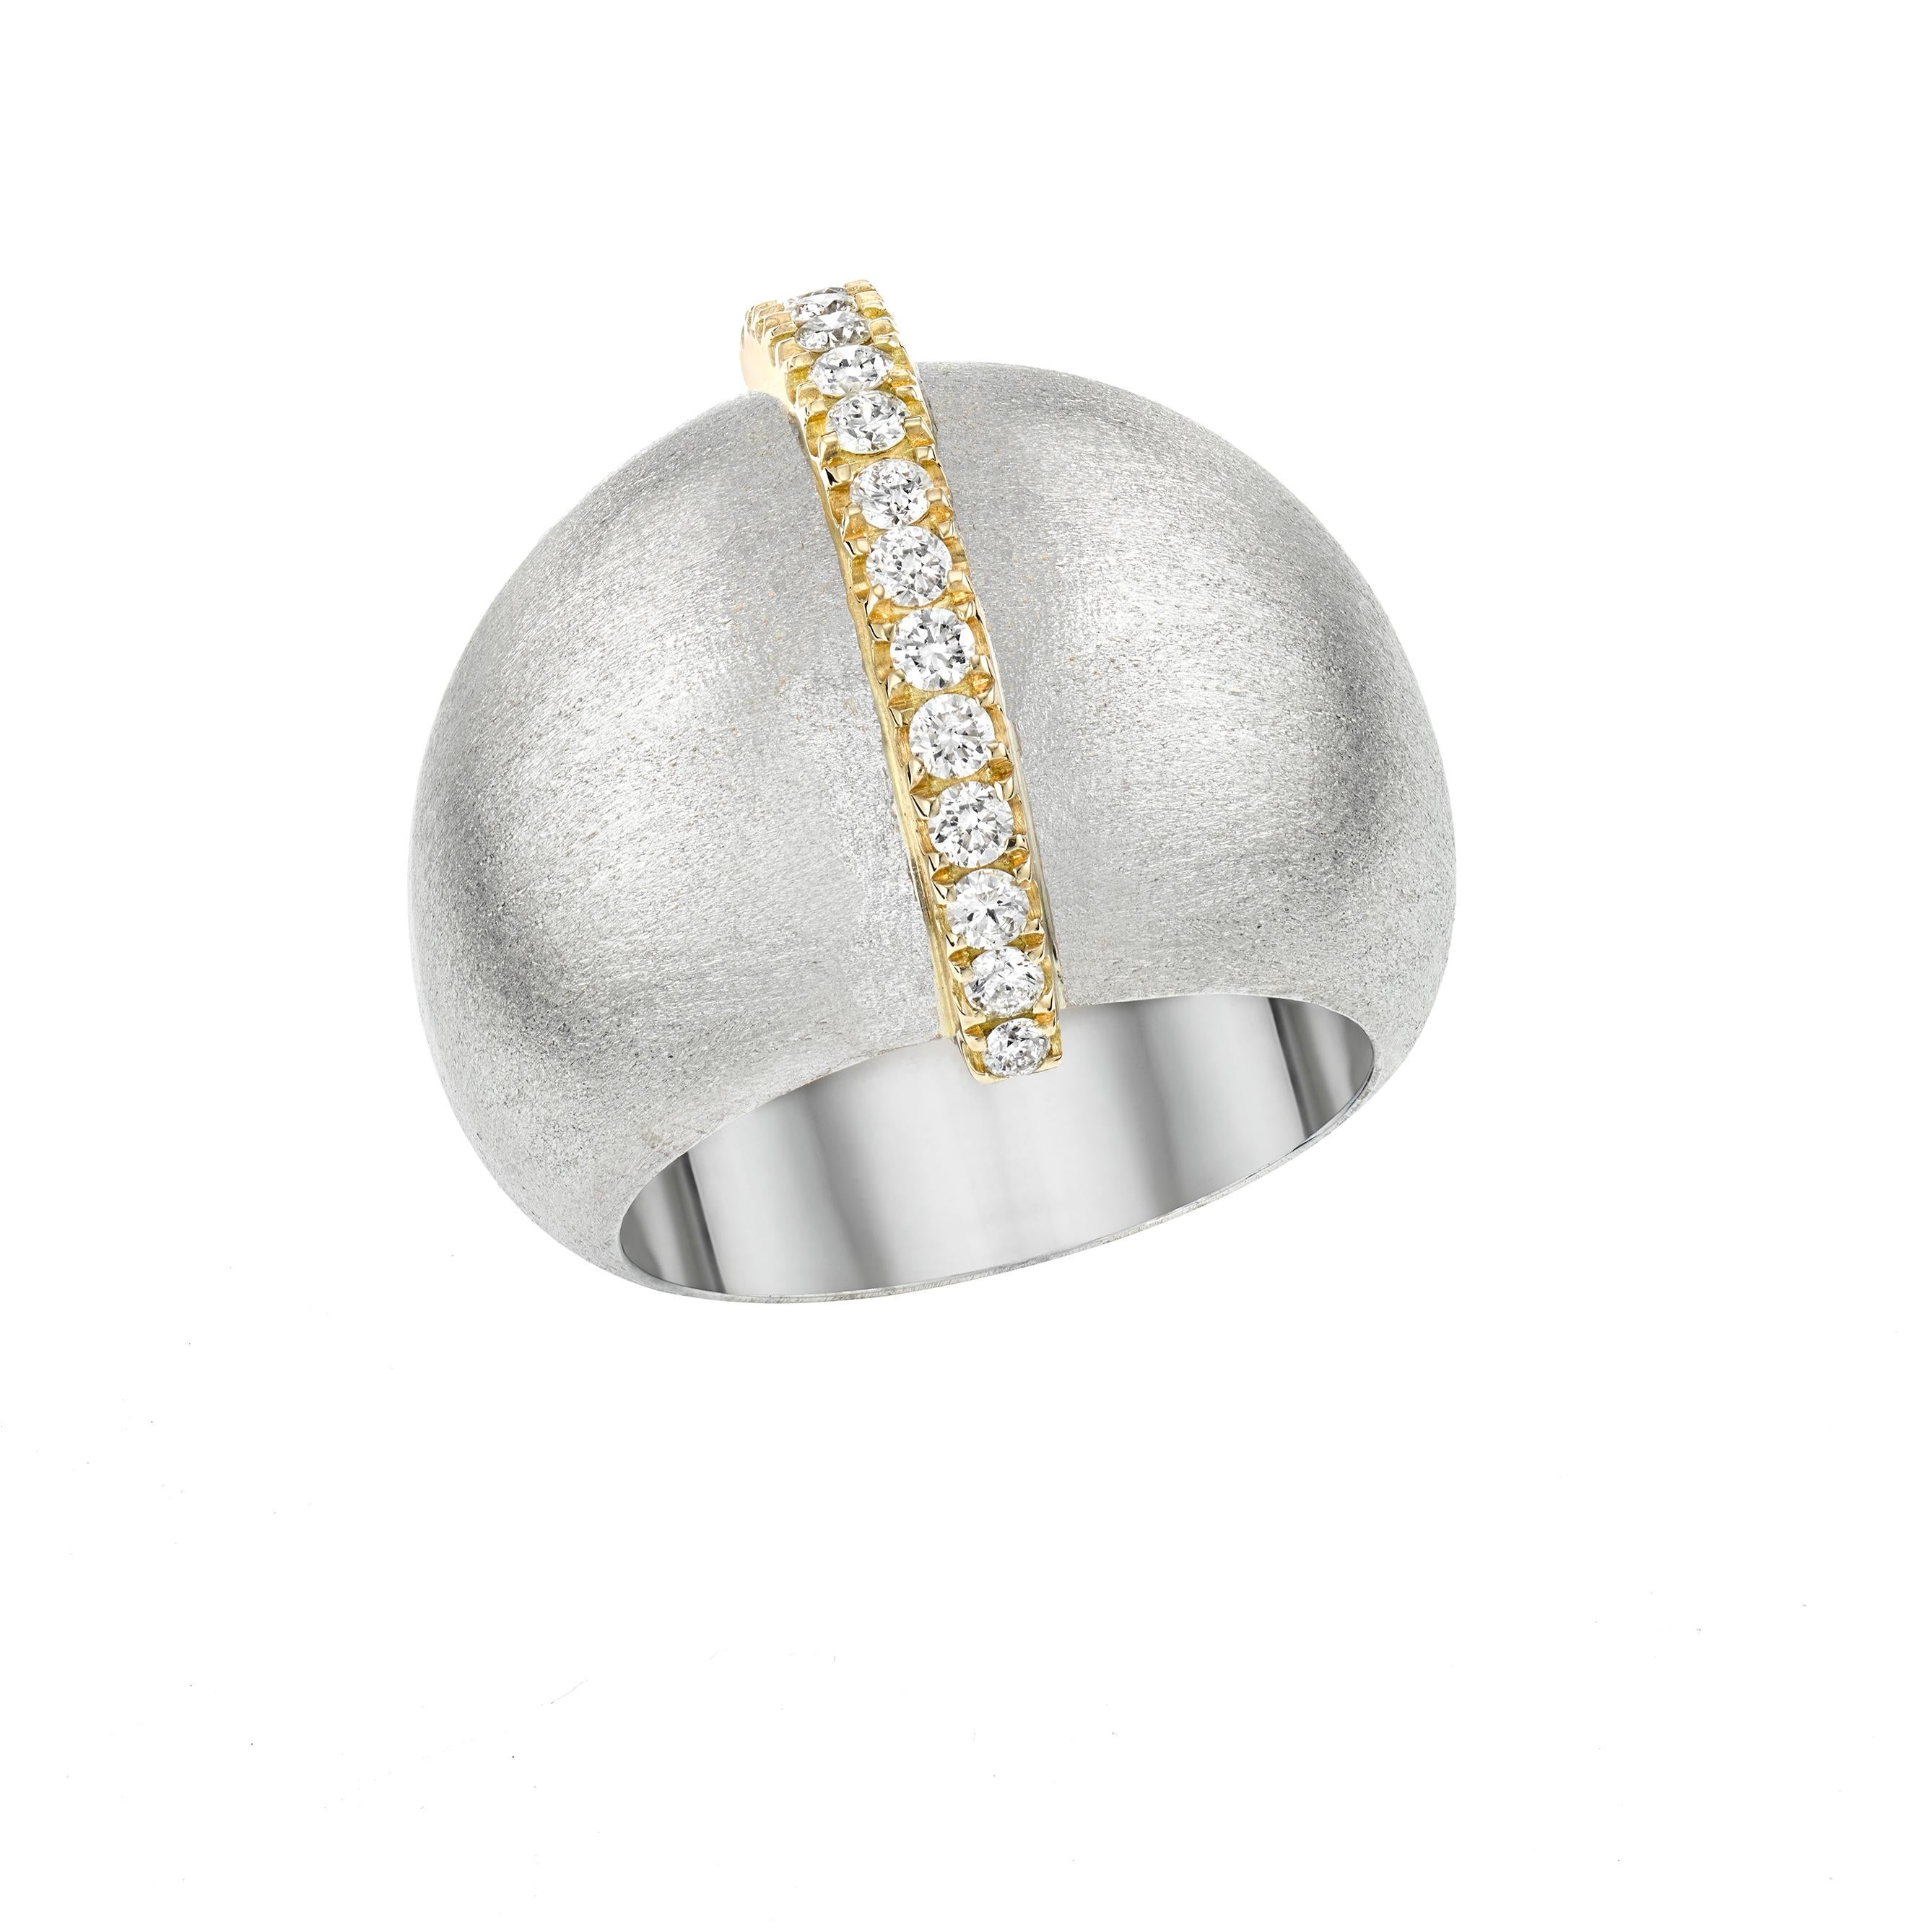 The organic shape of the AK’S TALISMAN Ring is true to AnaKatarina’s signature of addressing a classic form with a modern twist. A statement piece in white gold with a stone etched finish to resemble raw silk. A yellow gold and white diamond ridge